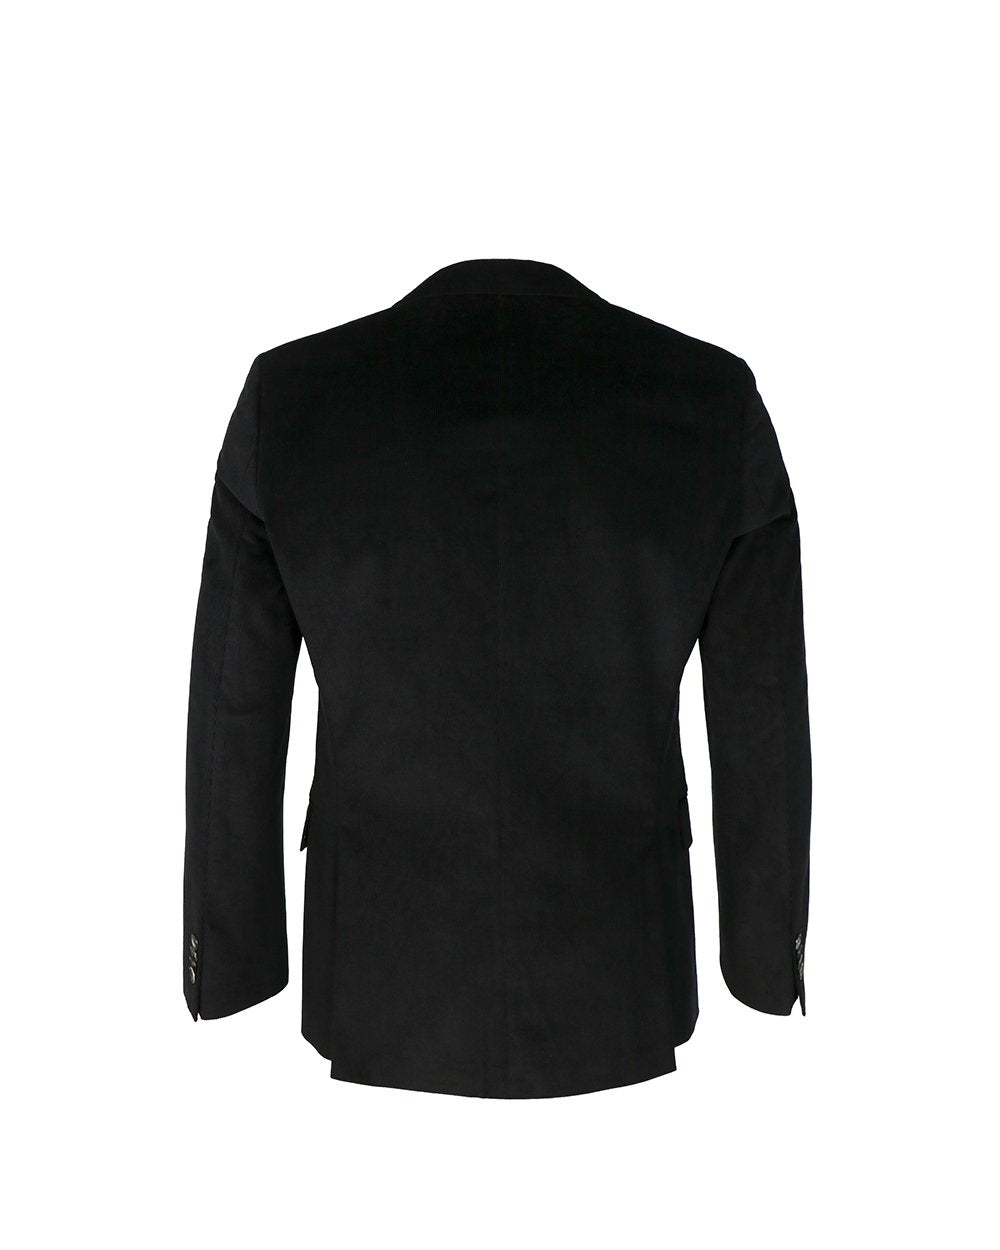 Hutsons Single-Breasted Blazer - ISSI Outlet